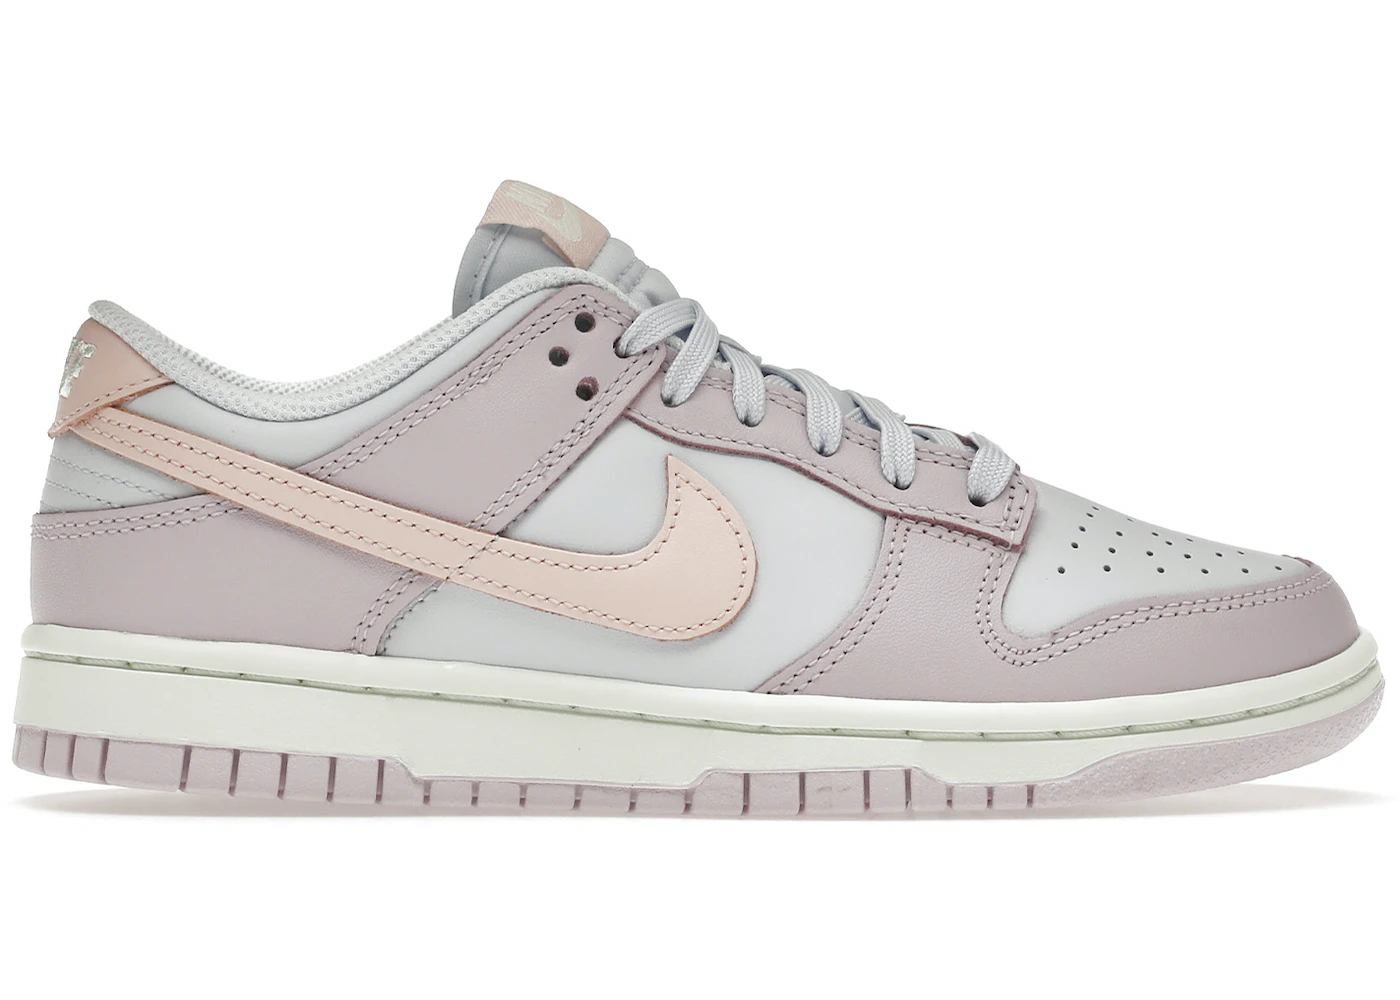 Nike Dunk easter dunks Low Easter 2022 (W) - DD1503-001 - US